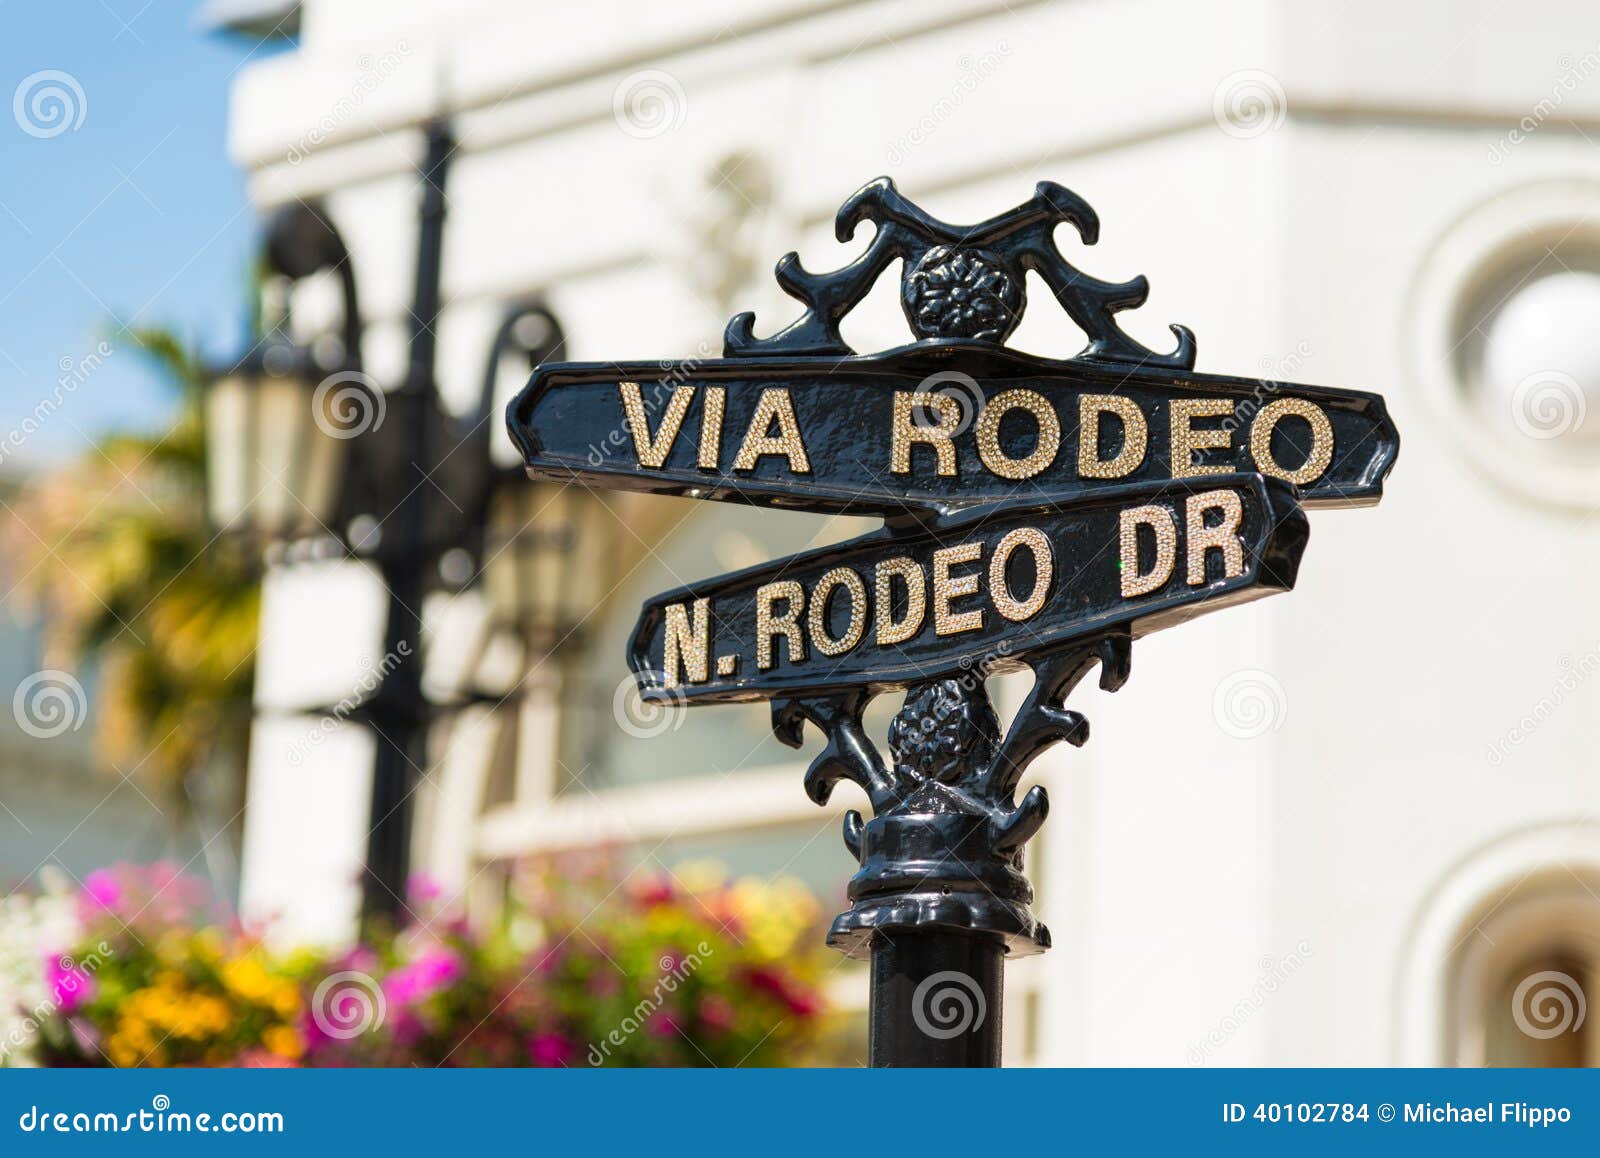 rodeo drive street signs